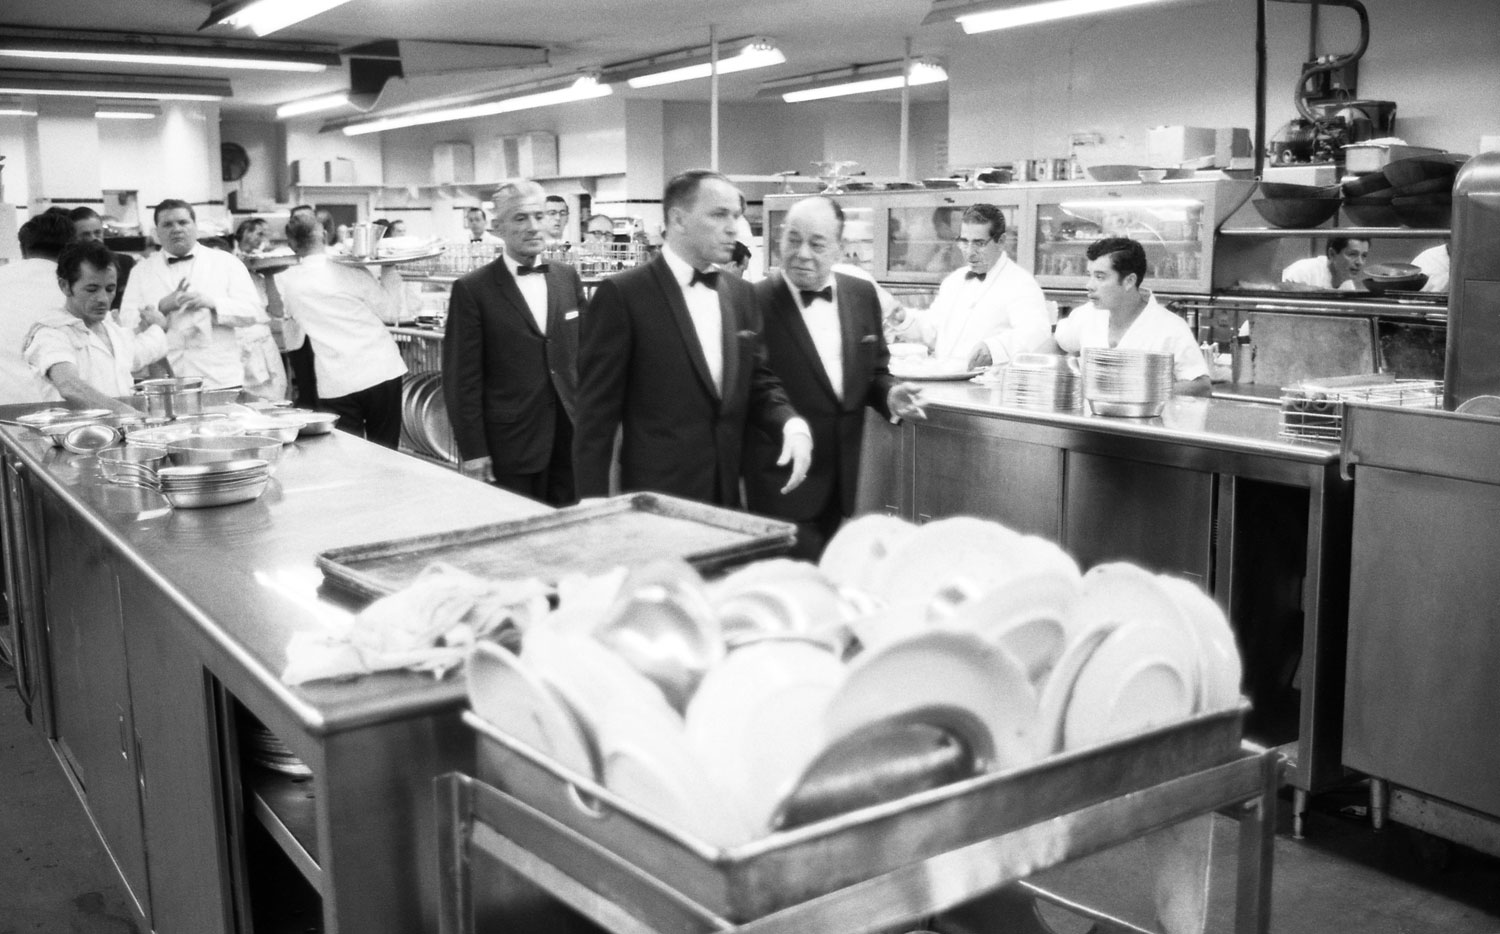 Frank Sinatra and Joe E. Lewis walk through the kitchen to get to the stage at the Eden Roc Resort in Miami in 1958.